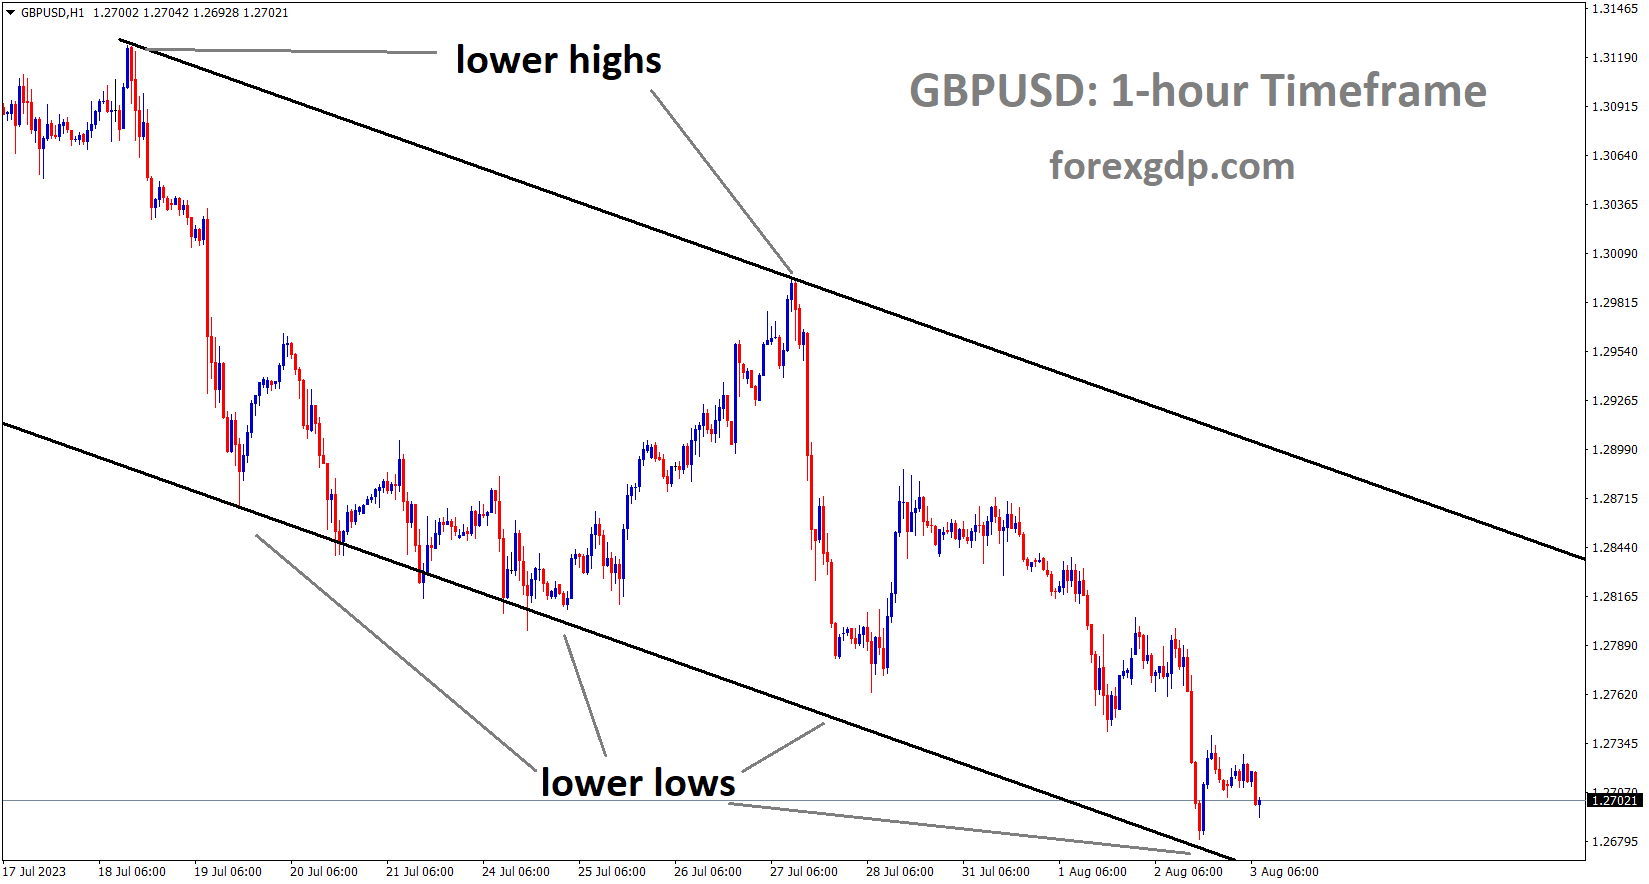 GBPUSD is moving in the descending channel and the market has reached the lower low area of the channel